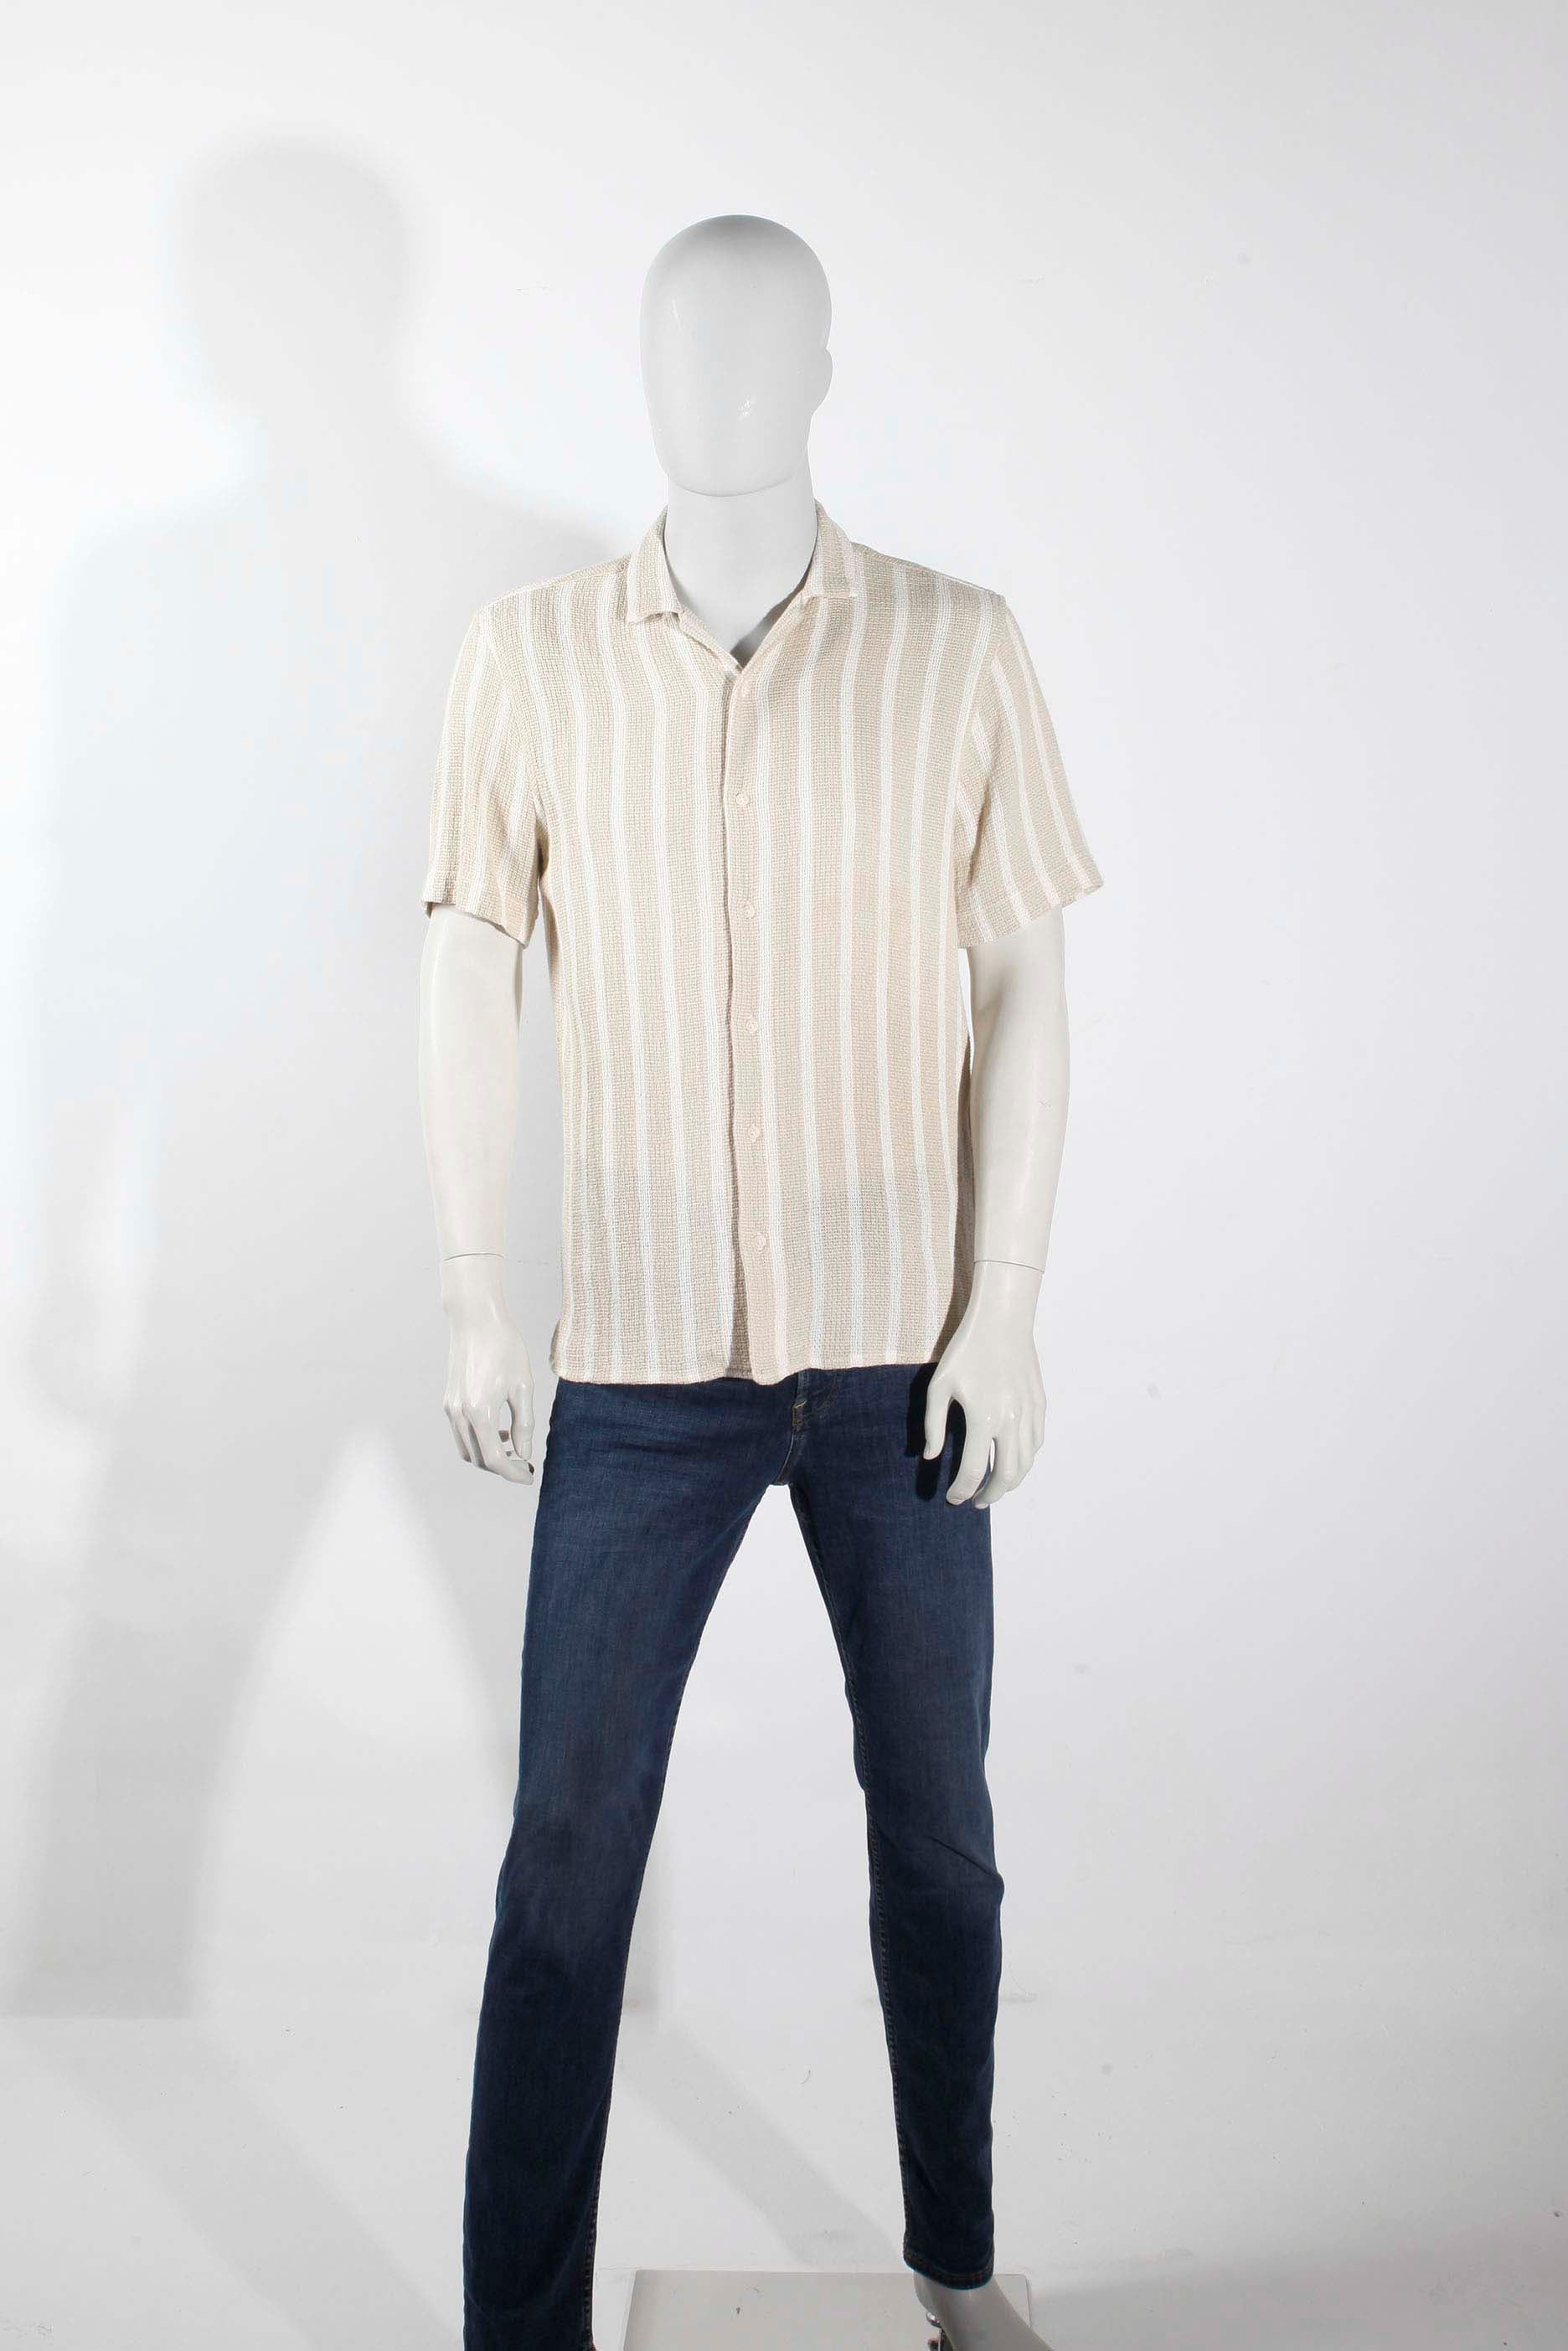 Mens Zara Knitted Beige and White Striped Shirt (Large)